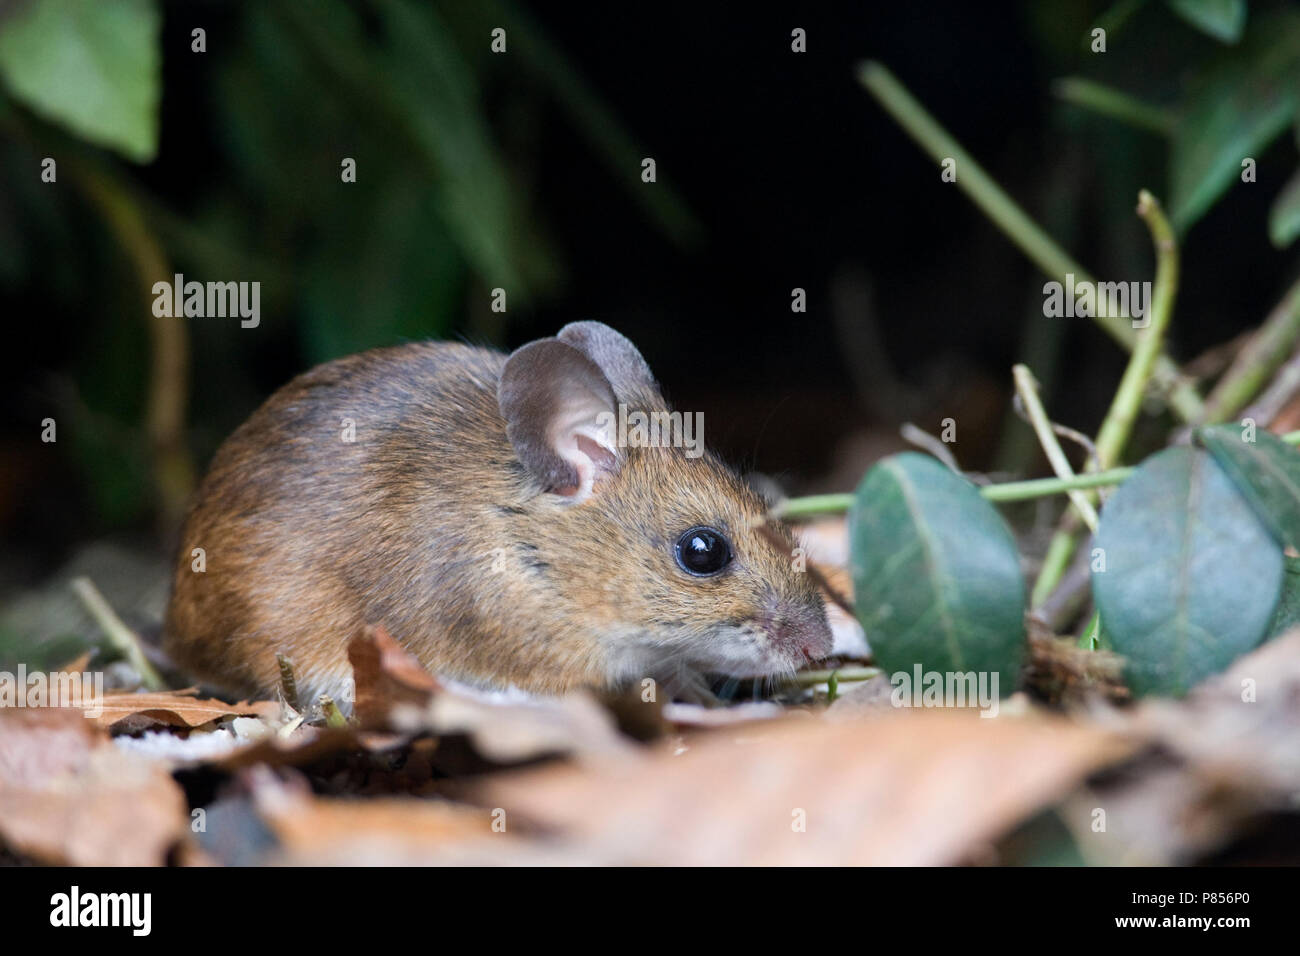 Bosmuis foeragerend in tuin Nederland, Wood Mouse foraging in garden Netherlands Stock Photo